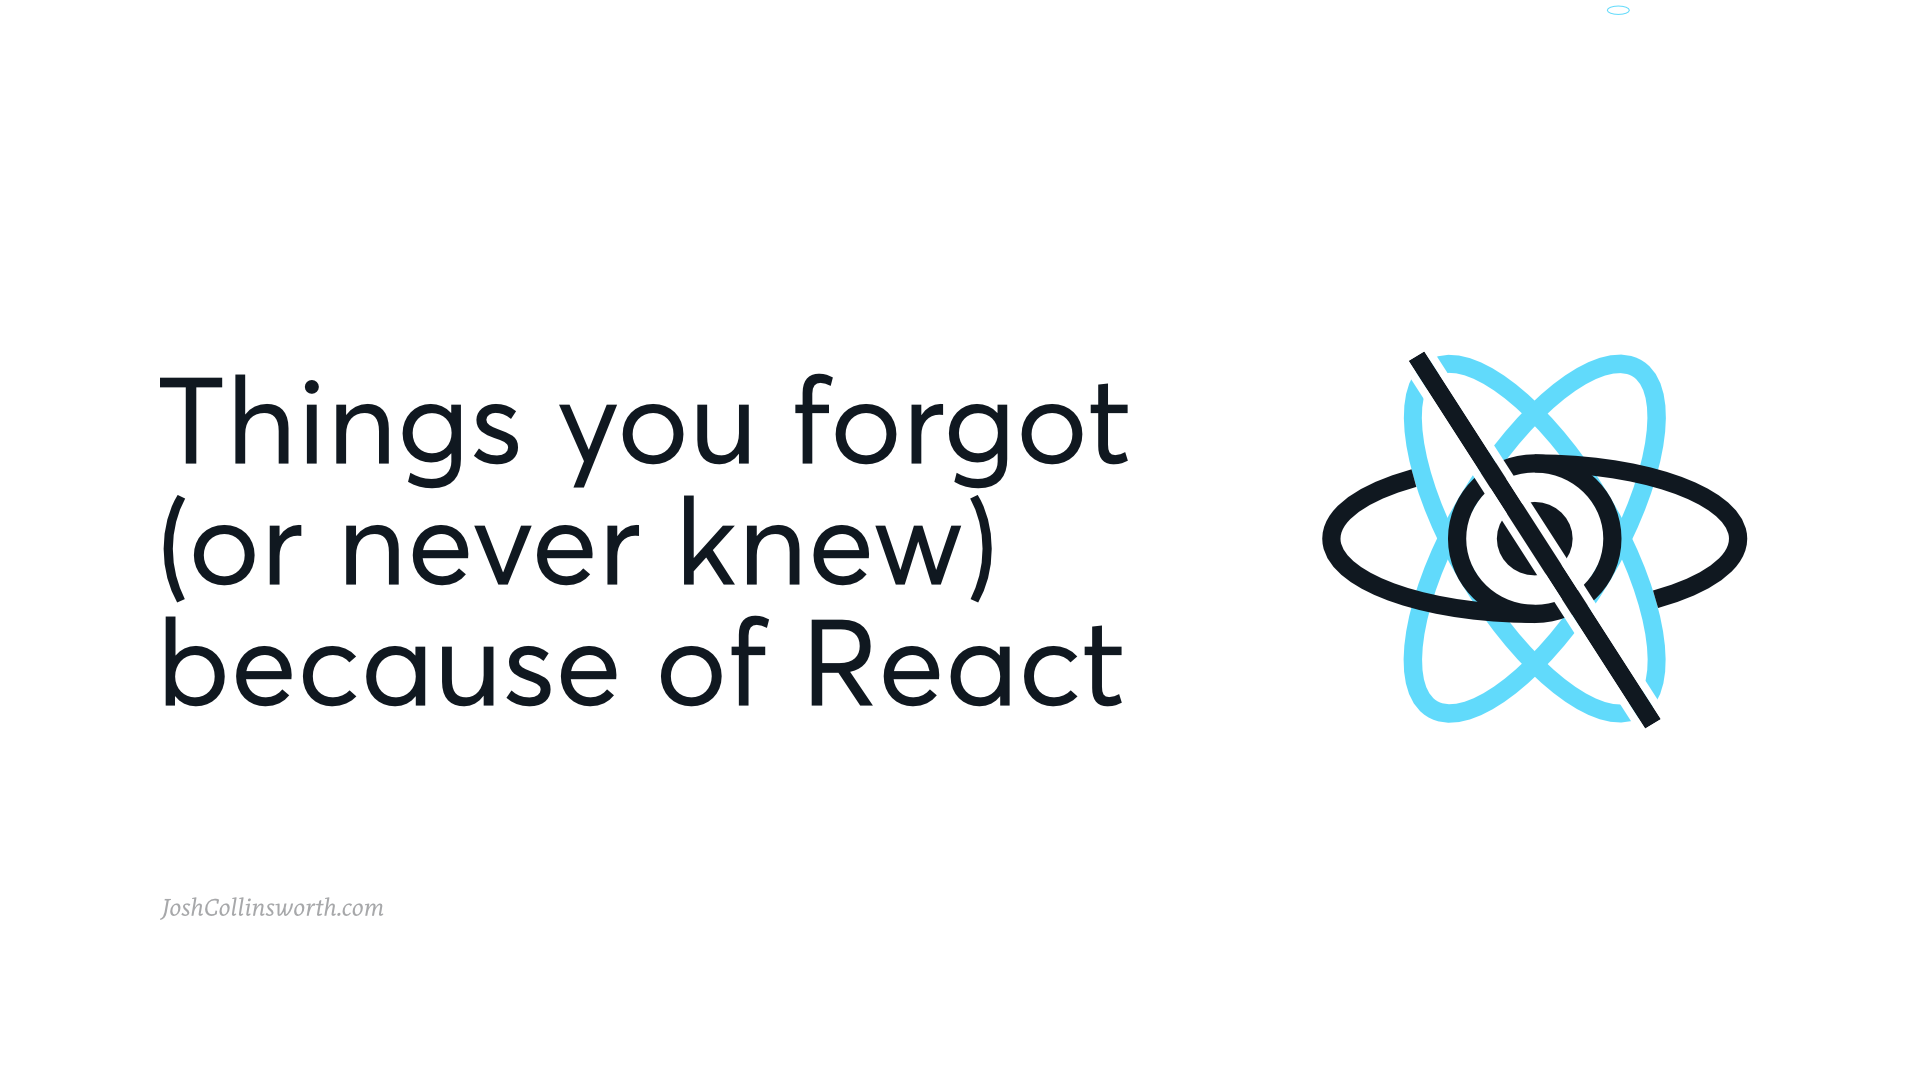 Preview image for Things you forgot (or never knew) because of React